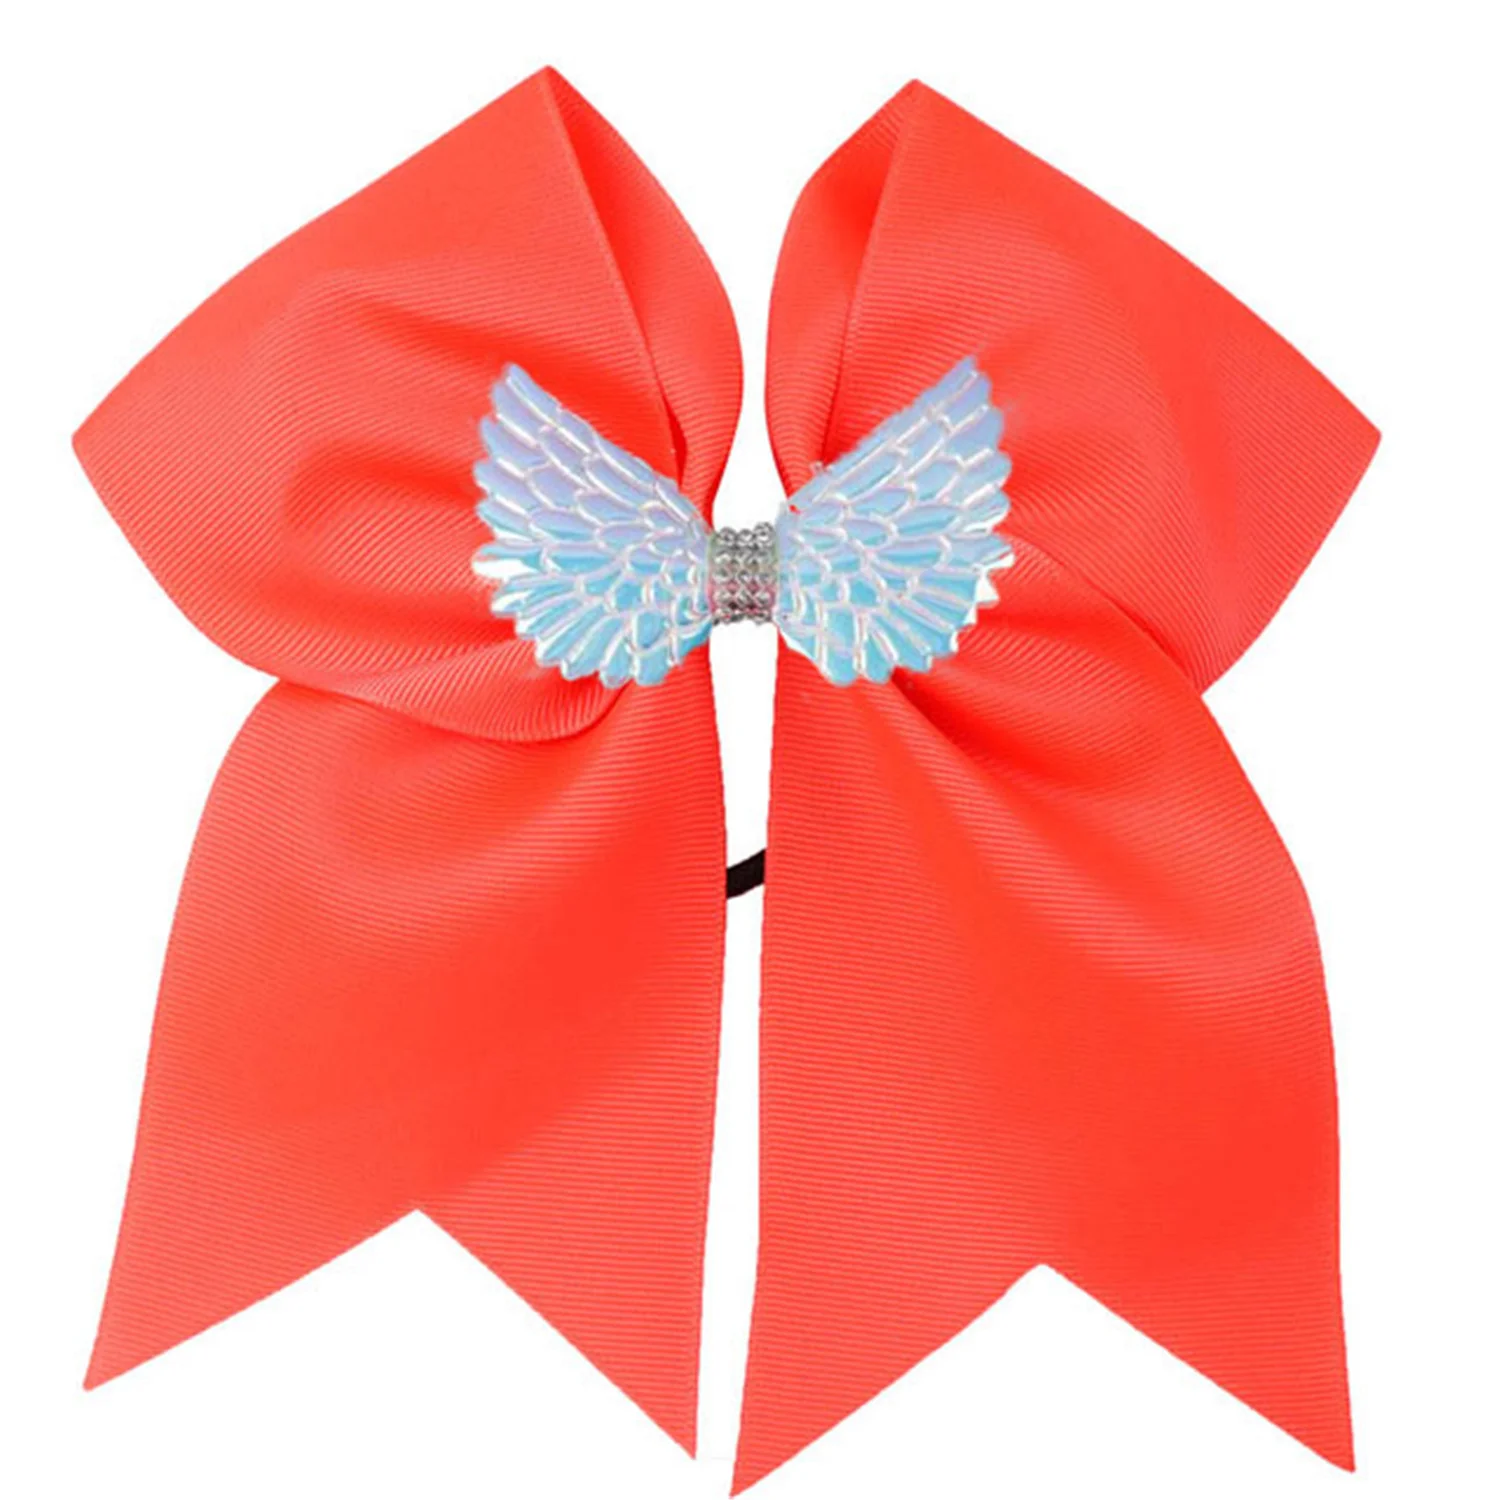 NEW 2pcs/ 7inch angel wings Hair Bow Girls Solid Cheer Bow With Elastic Band Cheerleader Hair Bands For Kids Hair Accessories 2pcs lot baby mini hair bows hair clips cotton soft hairpin for girl cheer bowknot barrettes children headwear hair accessories